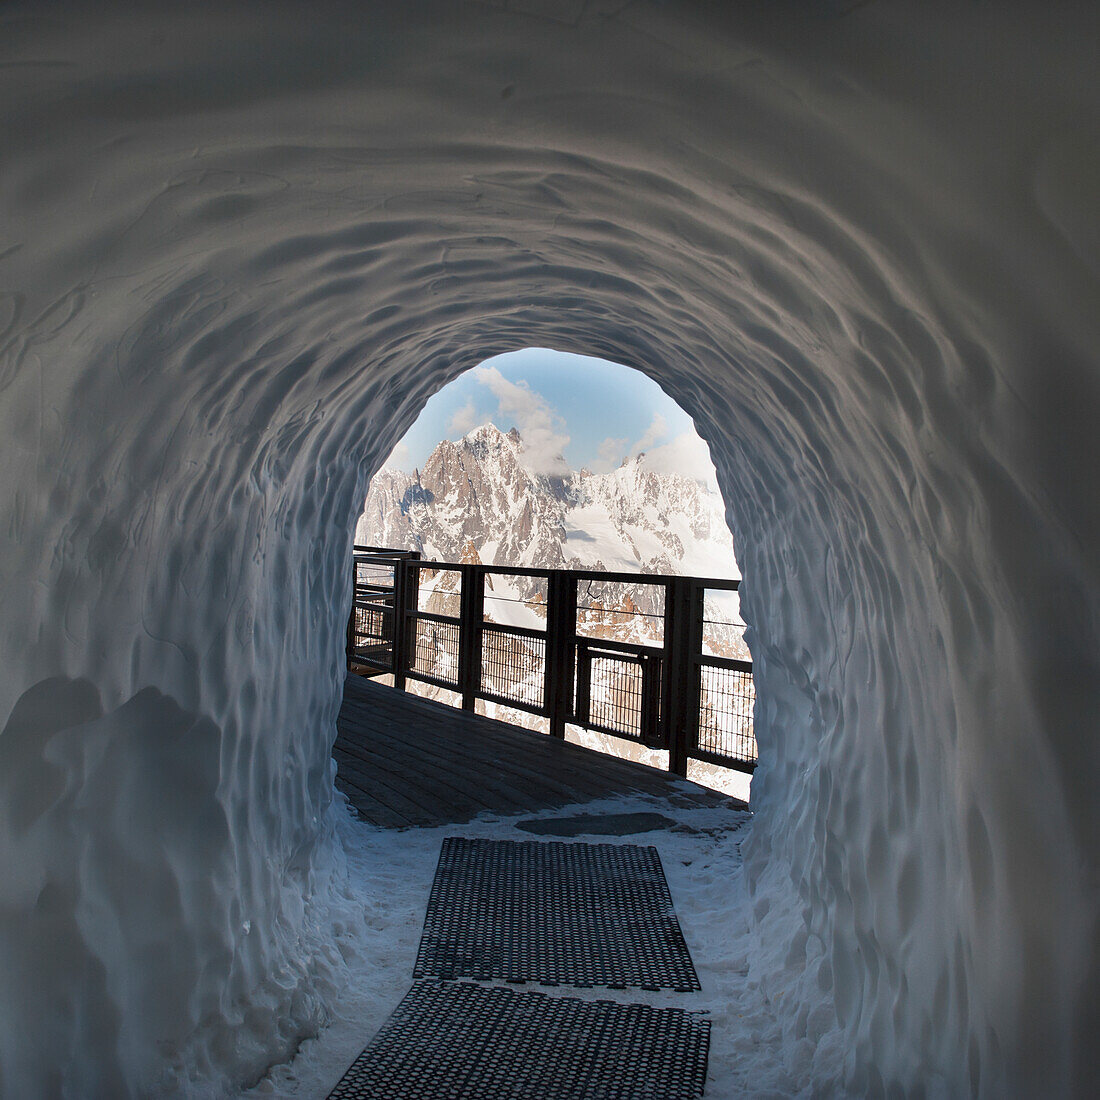 A Tunnel Through A Pile Of Snow On A Walkway; Chamonix-Mont-Blanc Rhone-Alpes France